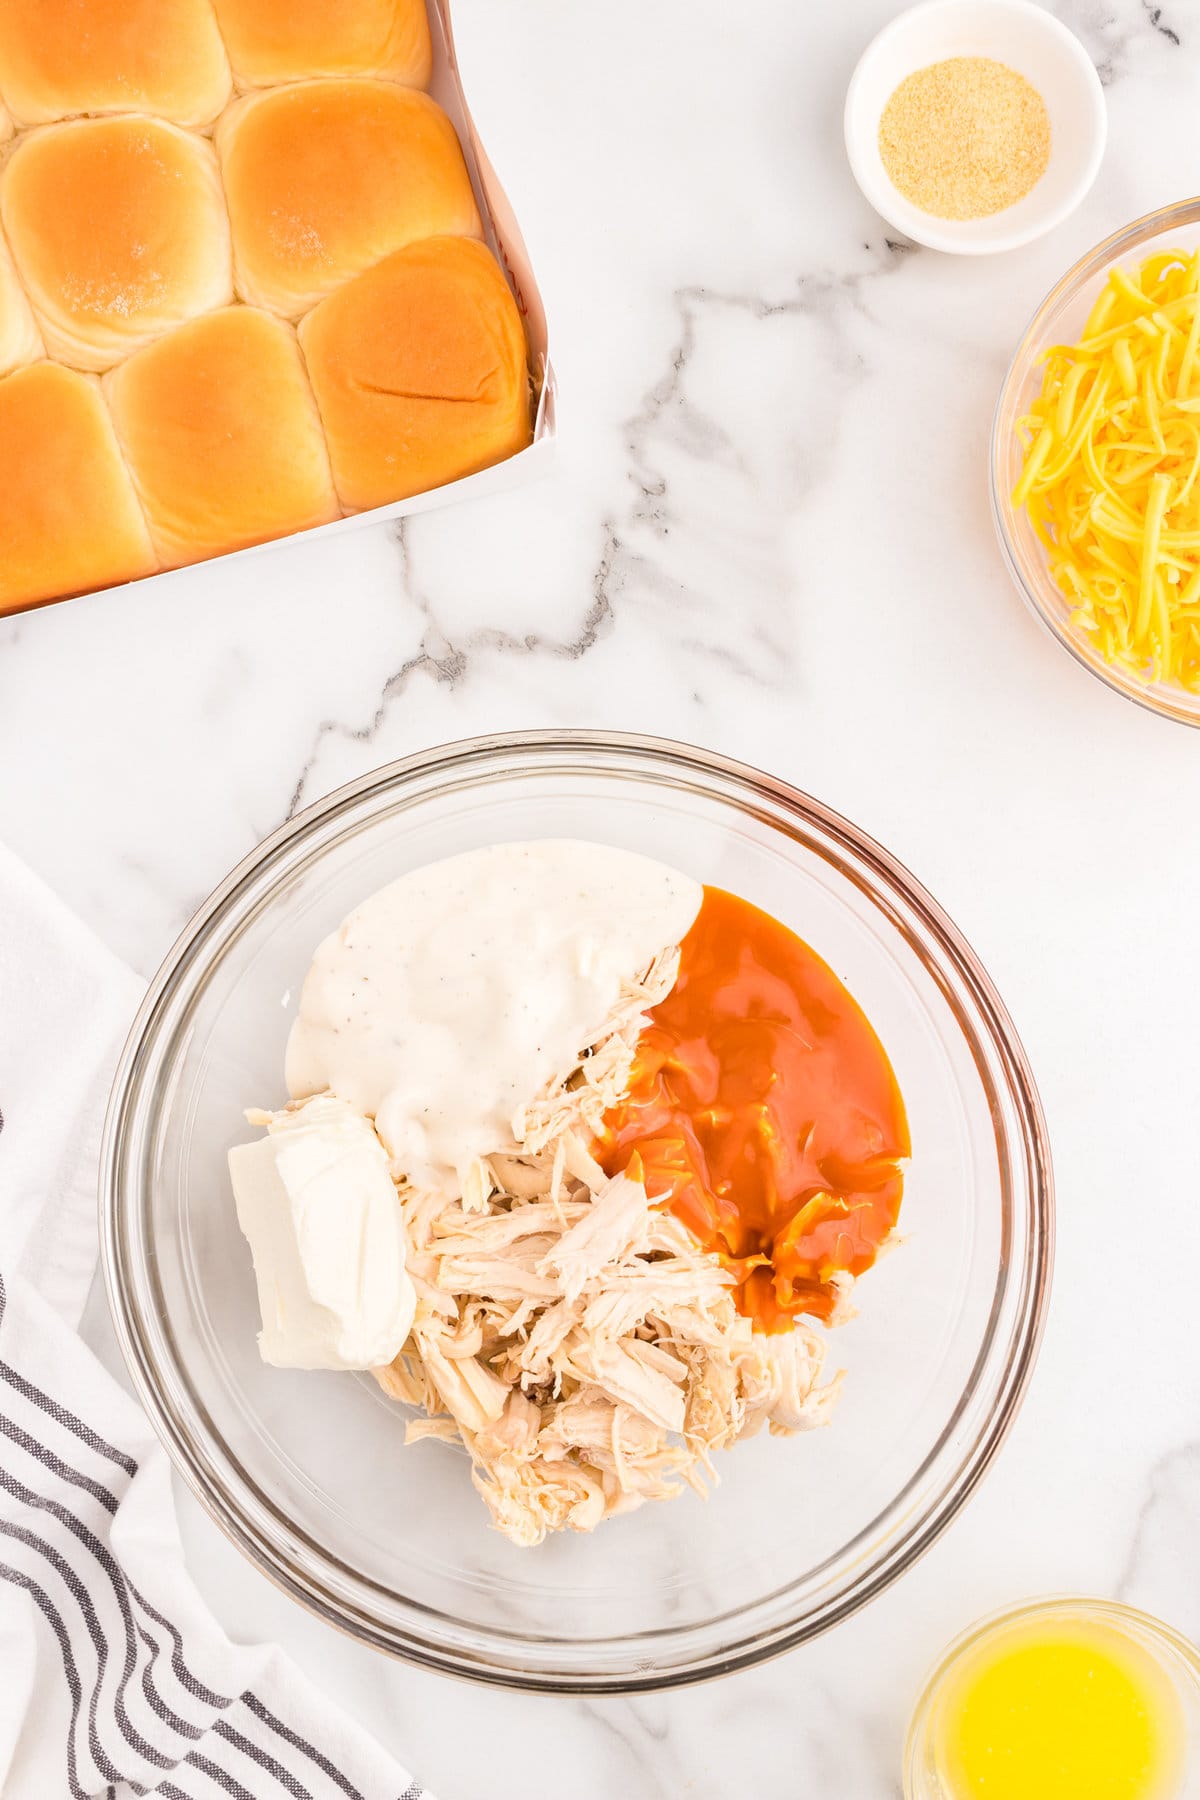 Buffalo Chicken Sliders ingredients in glass mixing bowl